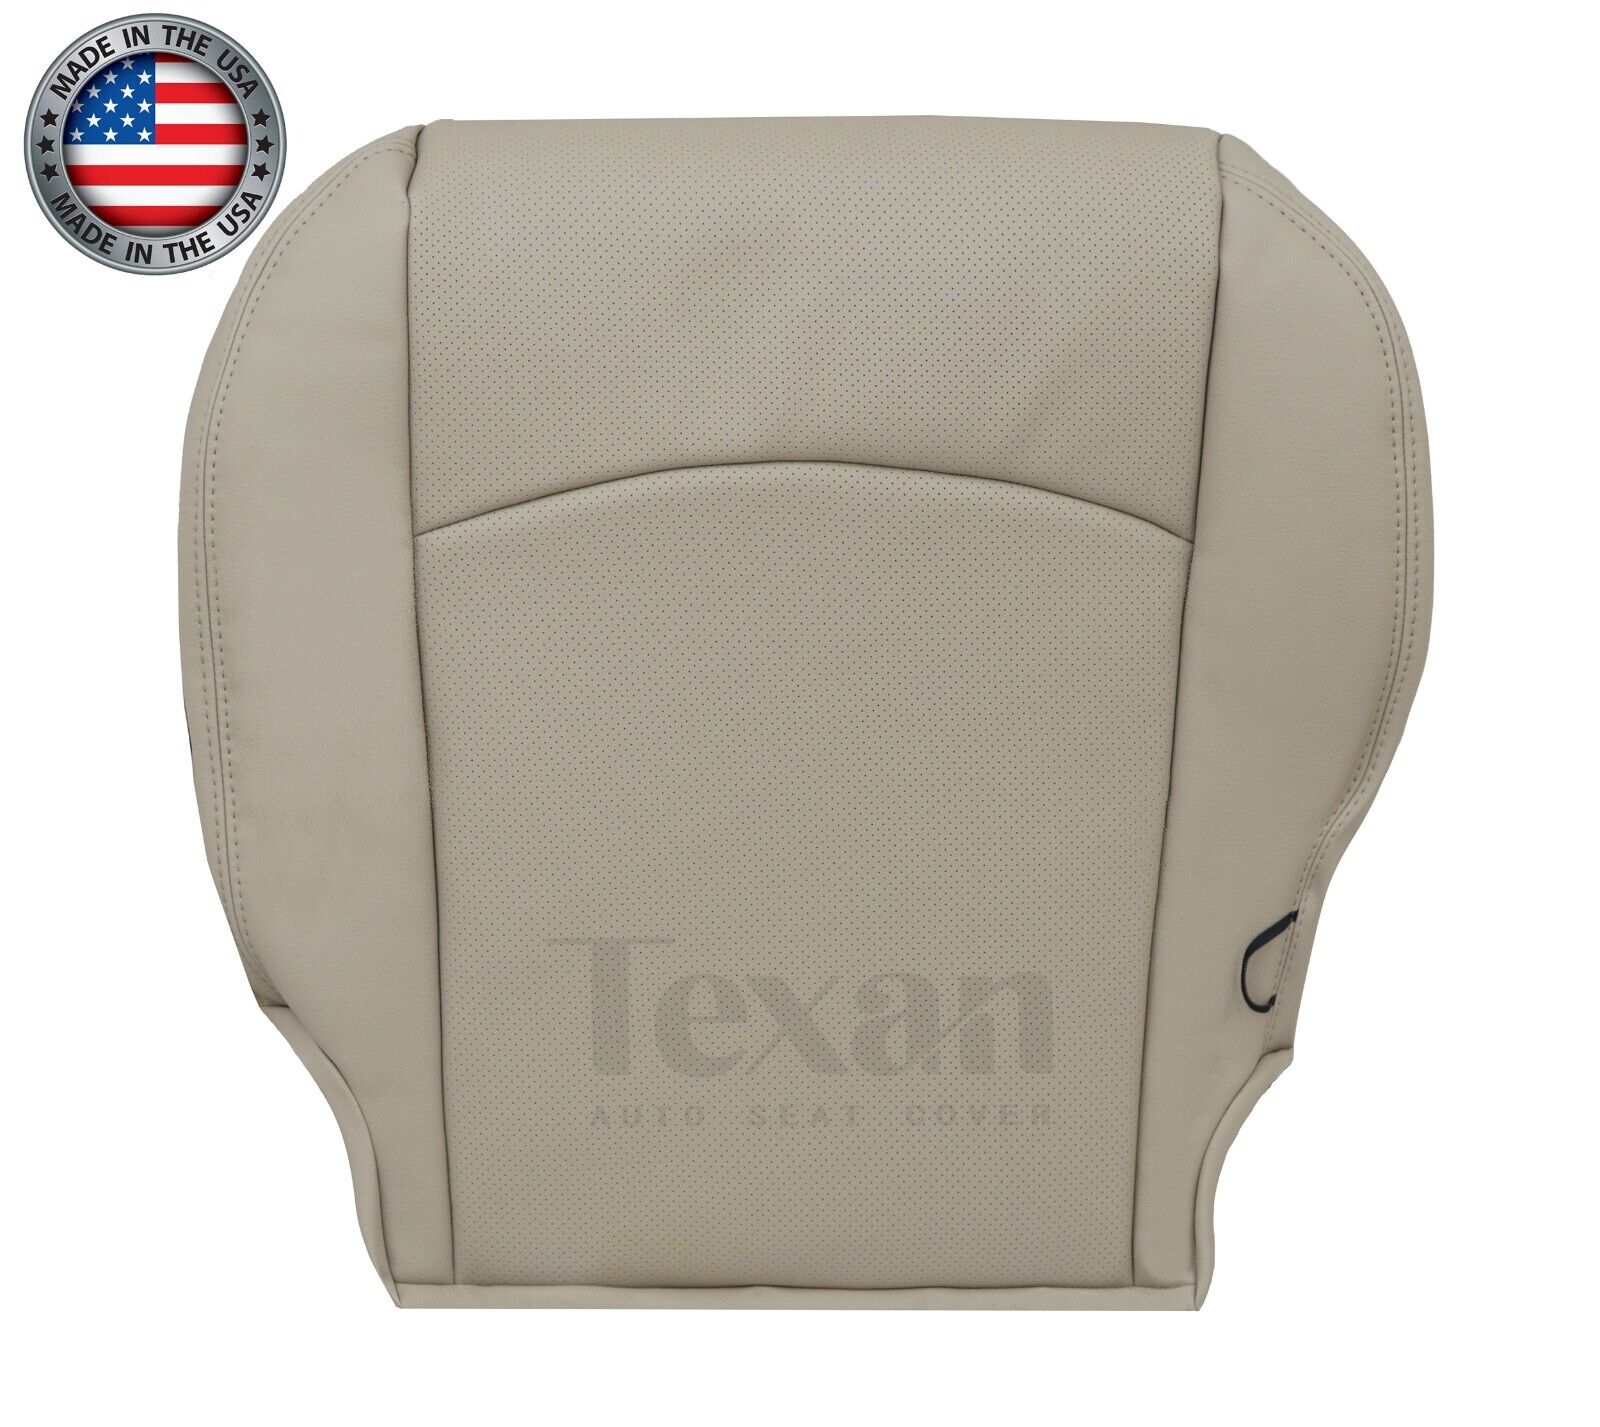 Driver Bottom Perforated Seat Cover Tan For 2013, 2015, 2017 Dodge Ram 2500